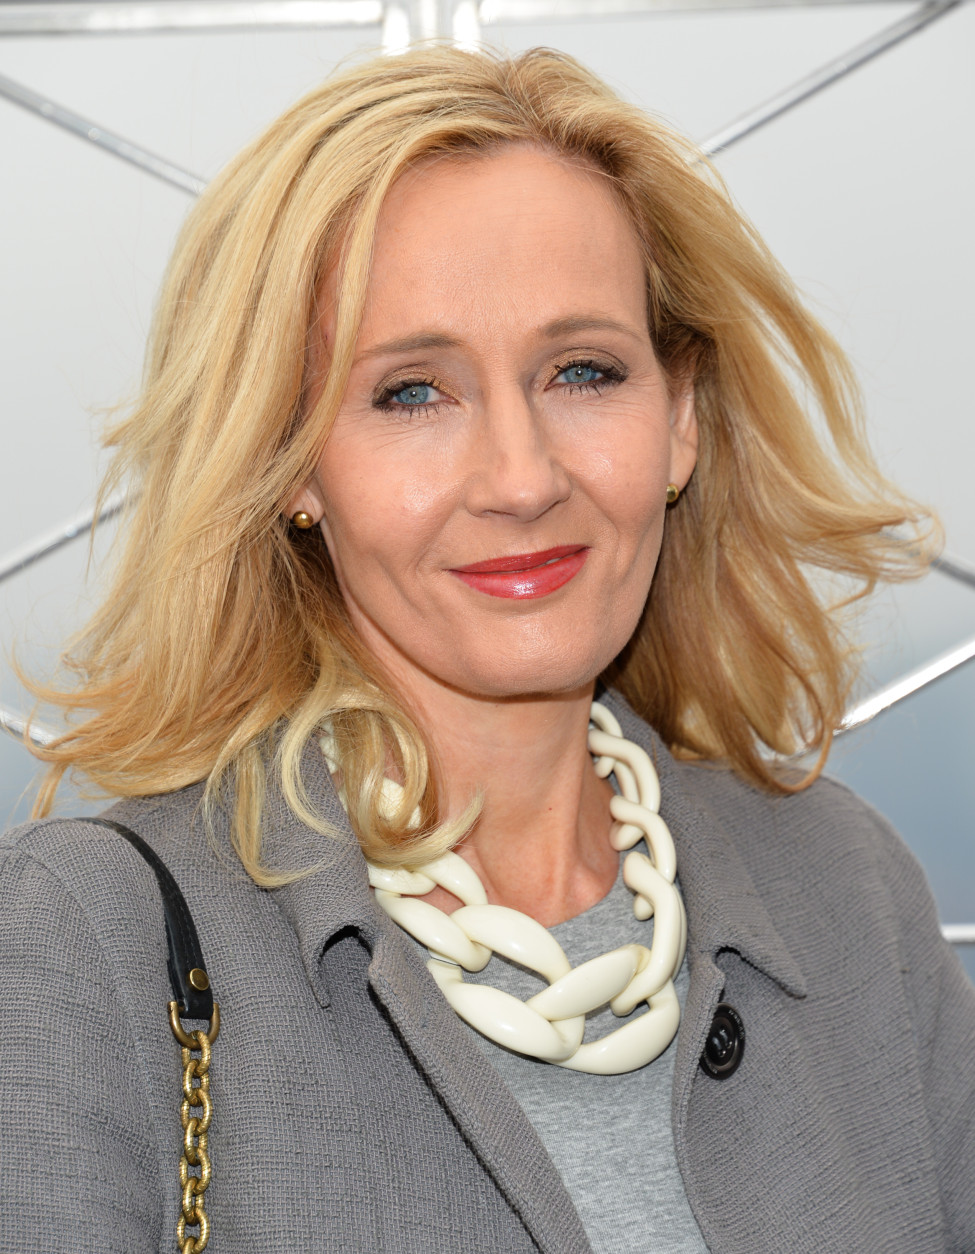 Author J.K. Rowling appears at the Empire State Building observation deck during a lighting ceremony and to mark the launch of her non-profit children's organization Lumos, on Thursday, April 9, 2015, in New York. (Photo by Evan Agostini/Invision/AP)